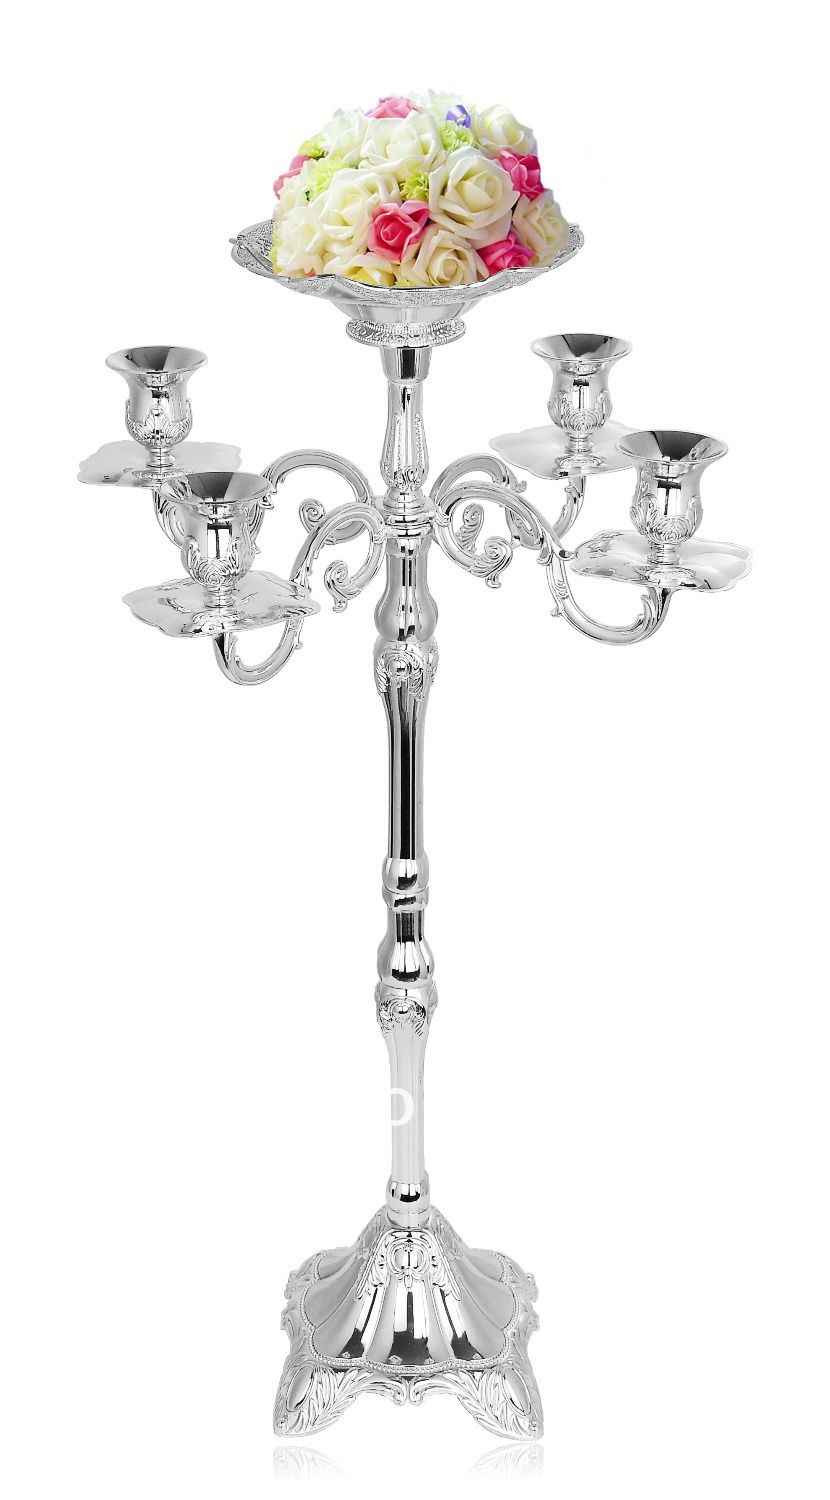 29 Unique Rent Mercury Glass Vases 2024 free download rent mercury glass vases of elegant crystal candelabra hire for crystal candle holders with new arrival selling best 63cm 5 arms candelabra with flower bowl in crystal candle holders